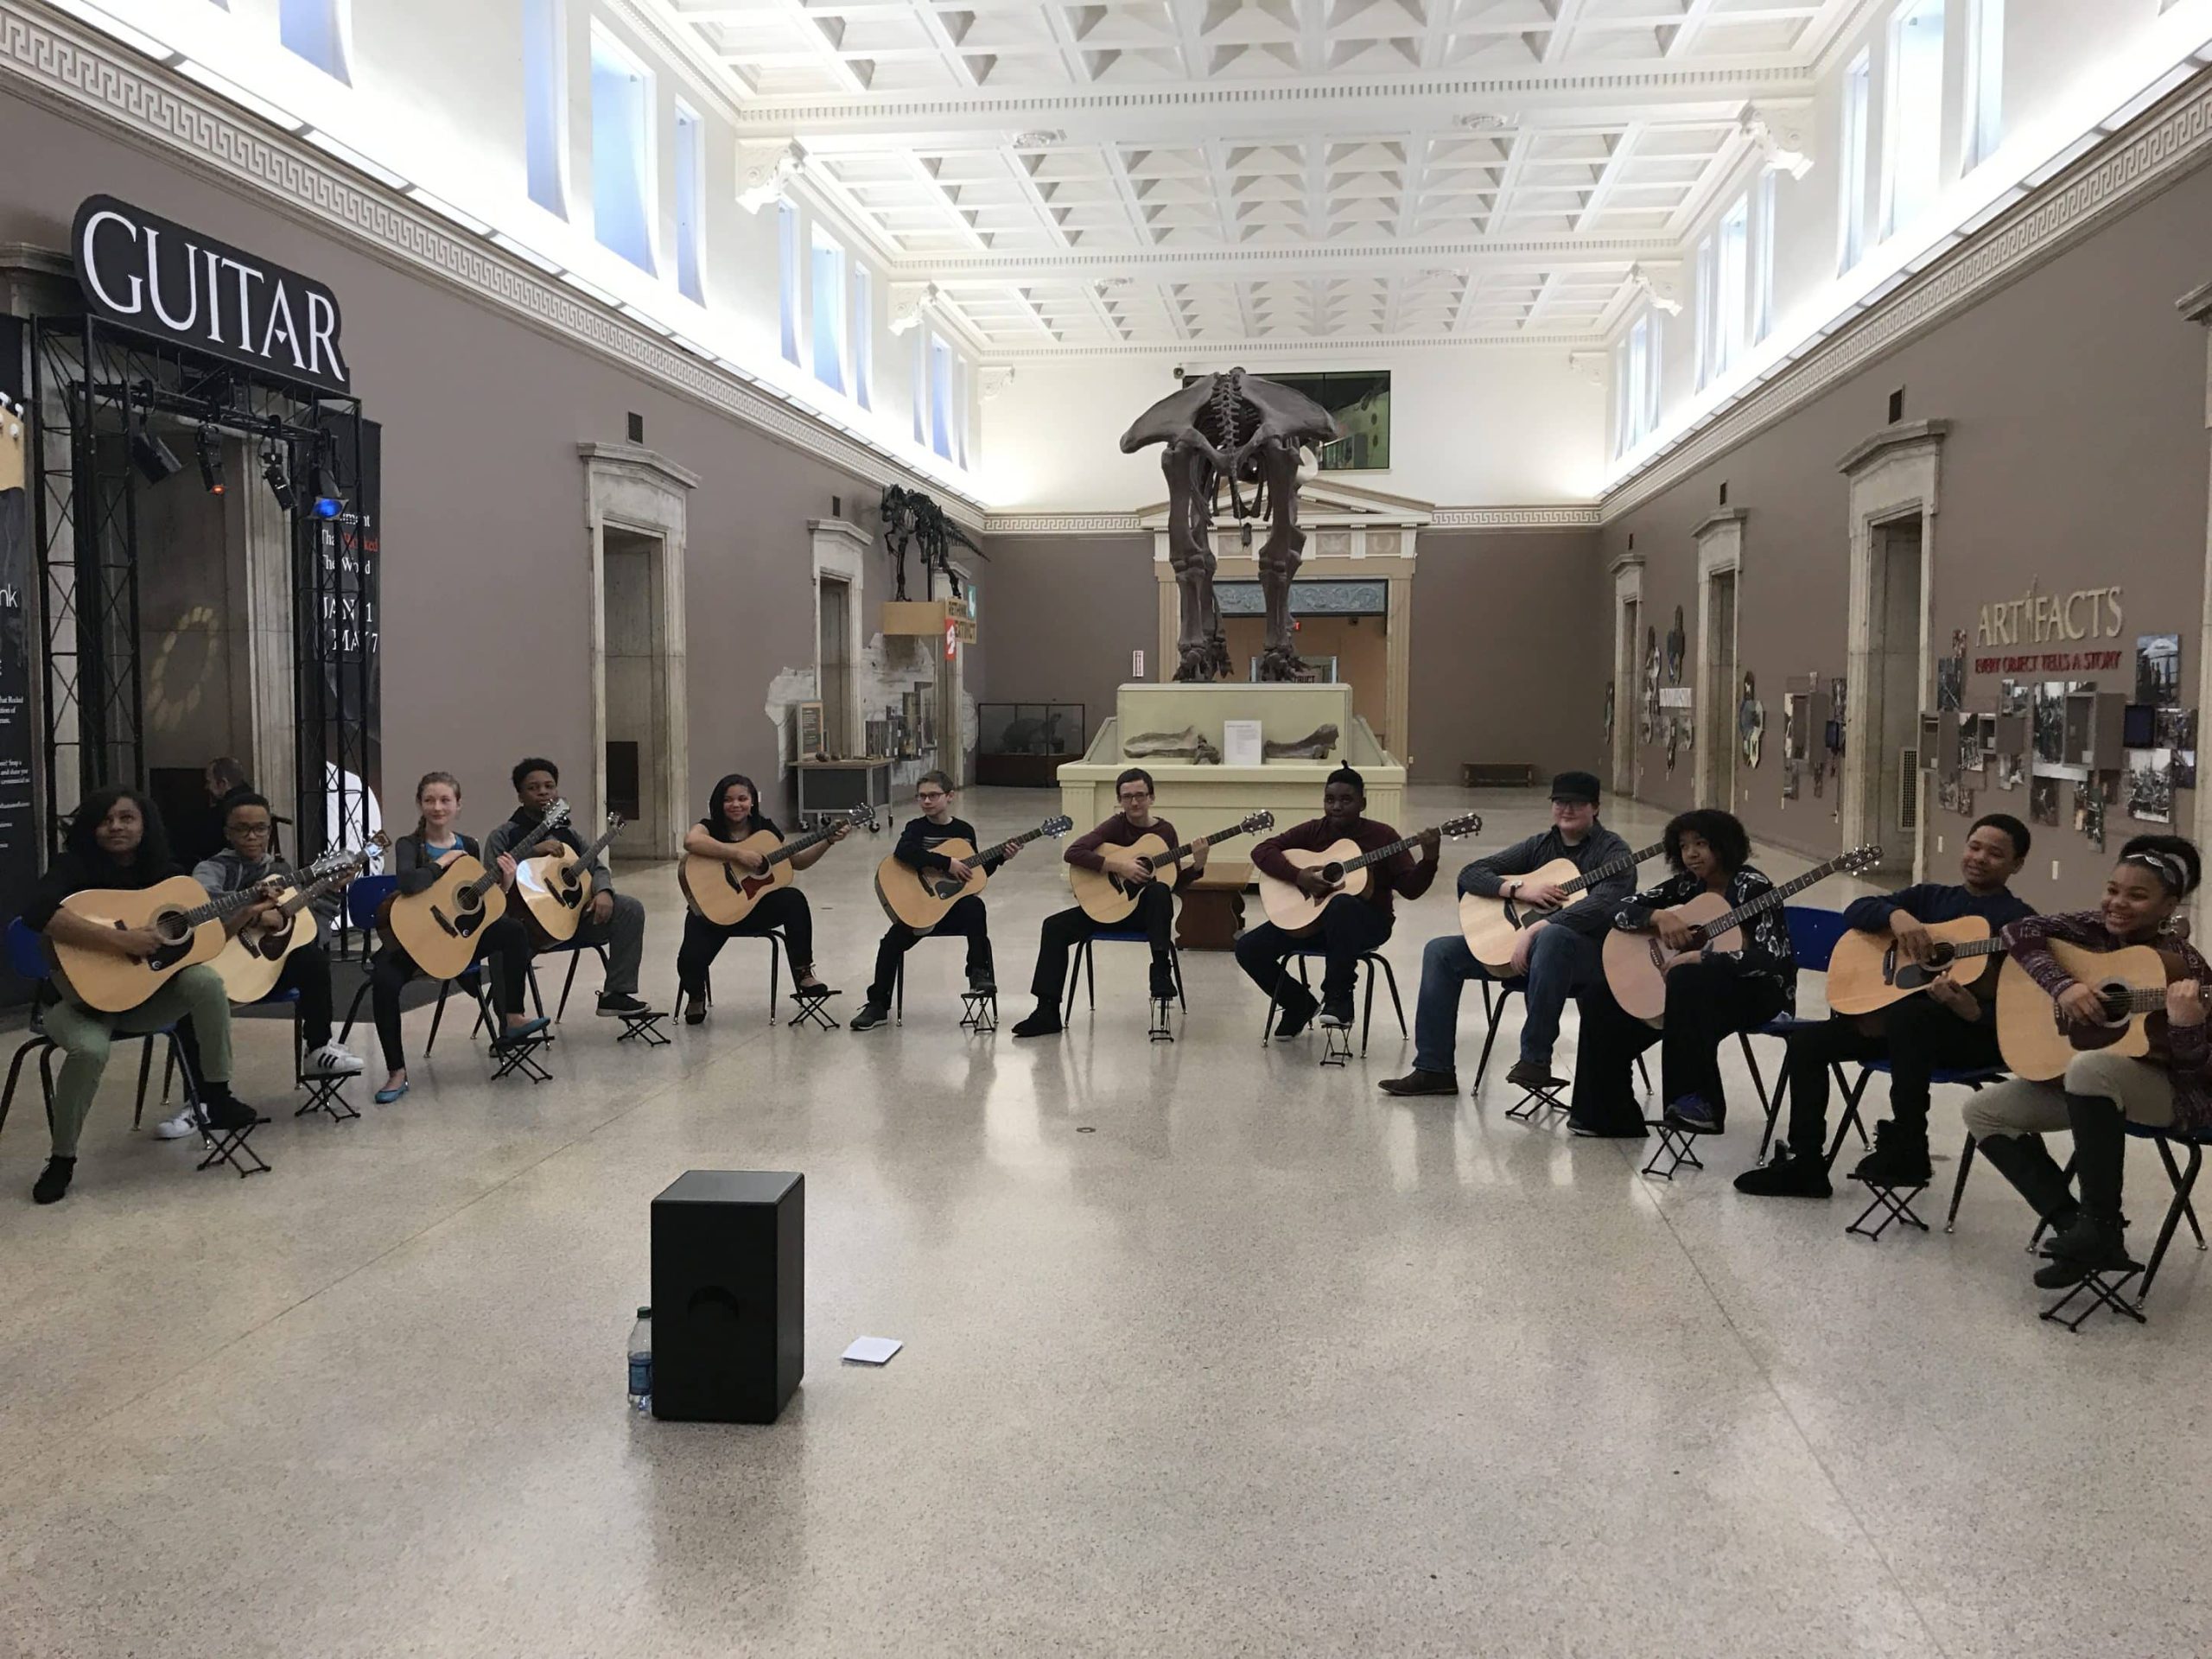 7th & 8th graders got to play guitar at the Buffalo Science Museum